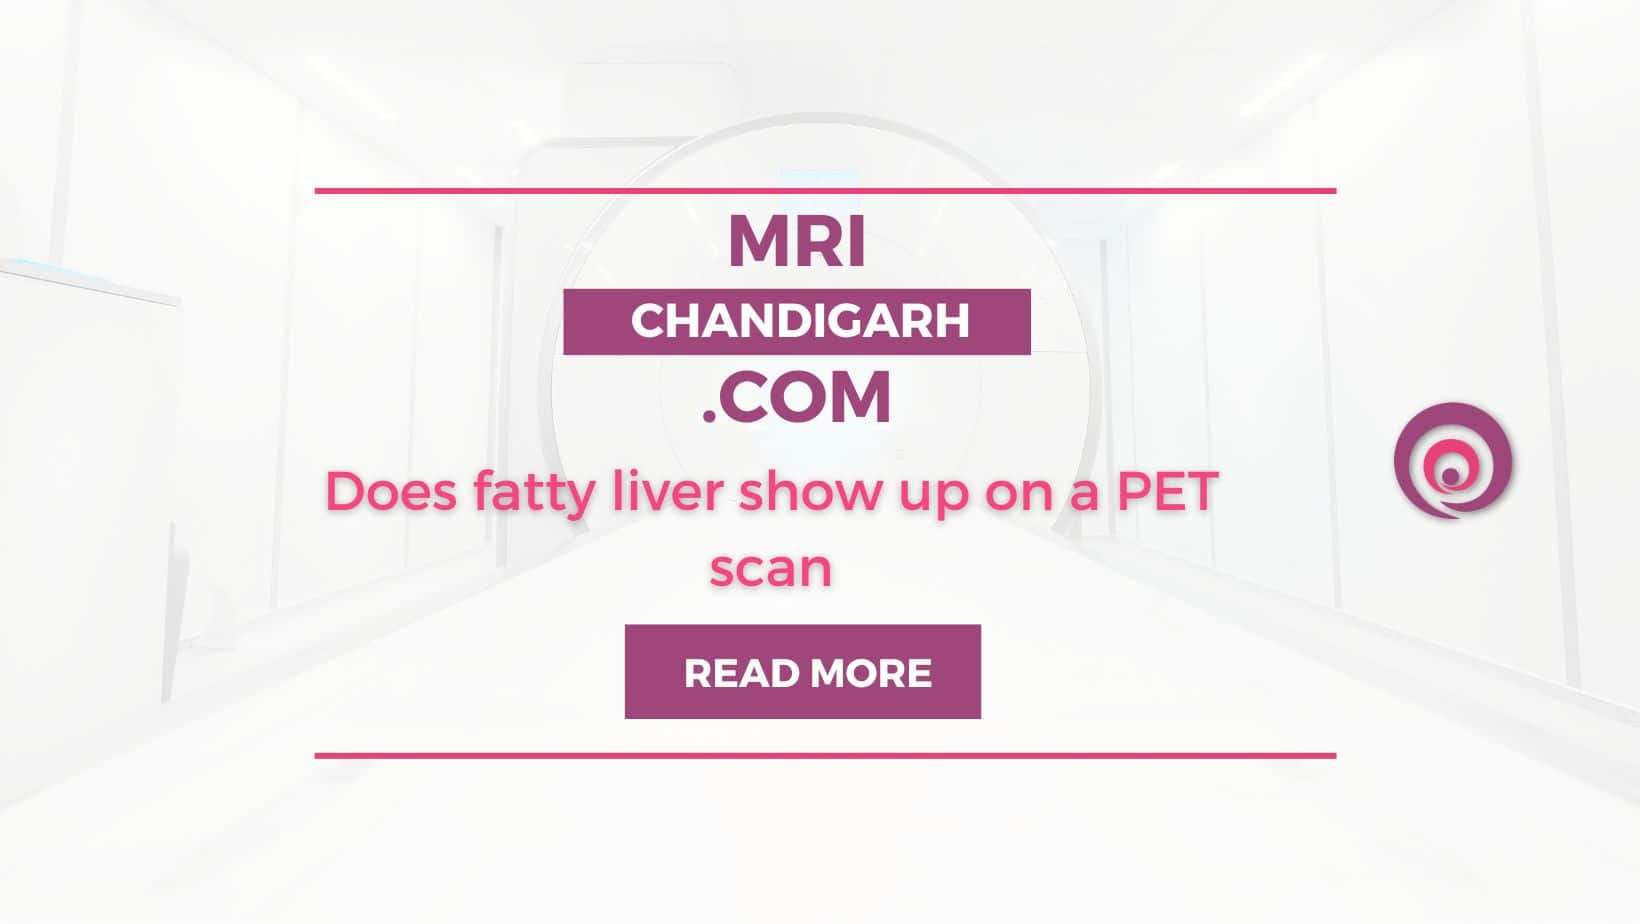 Does fatty liver show up on PET scan?